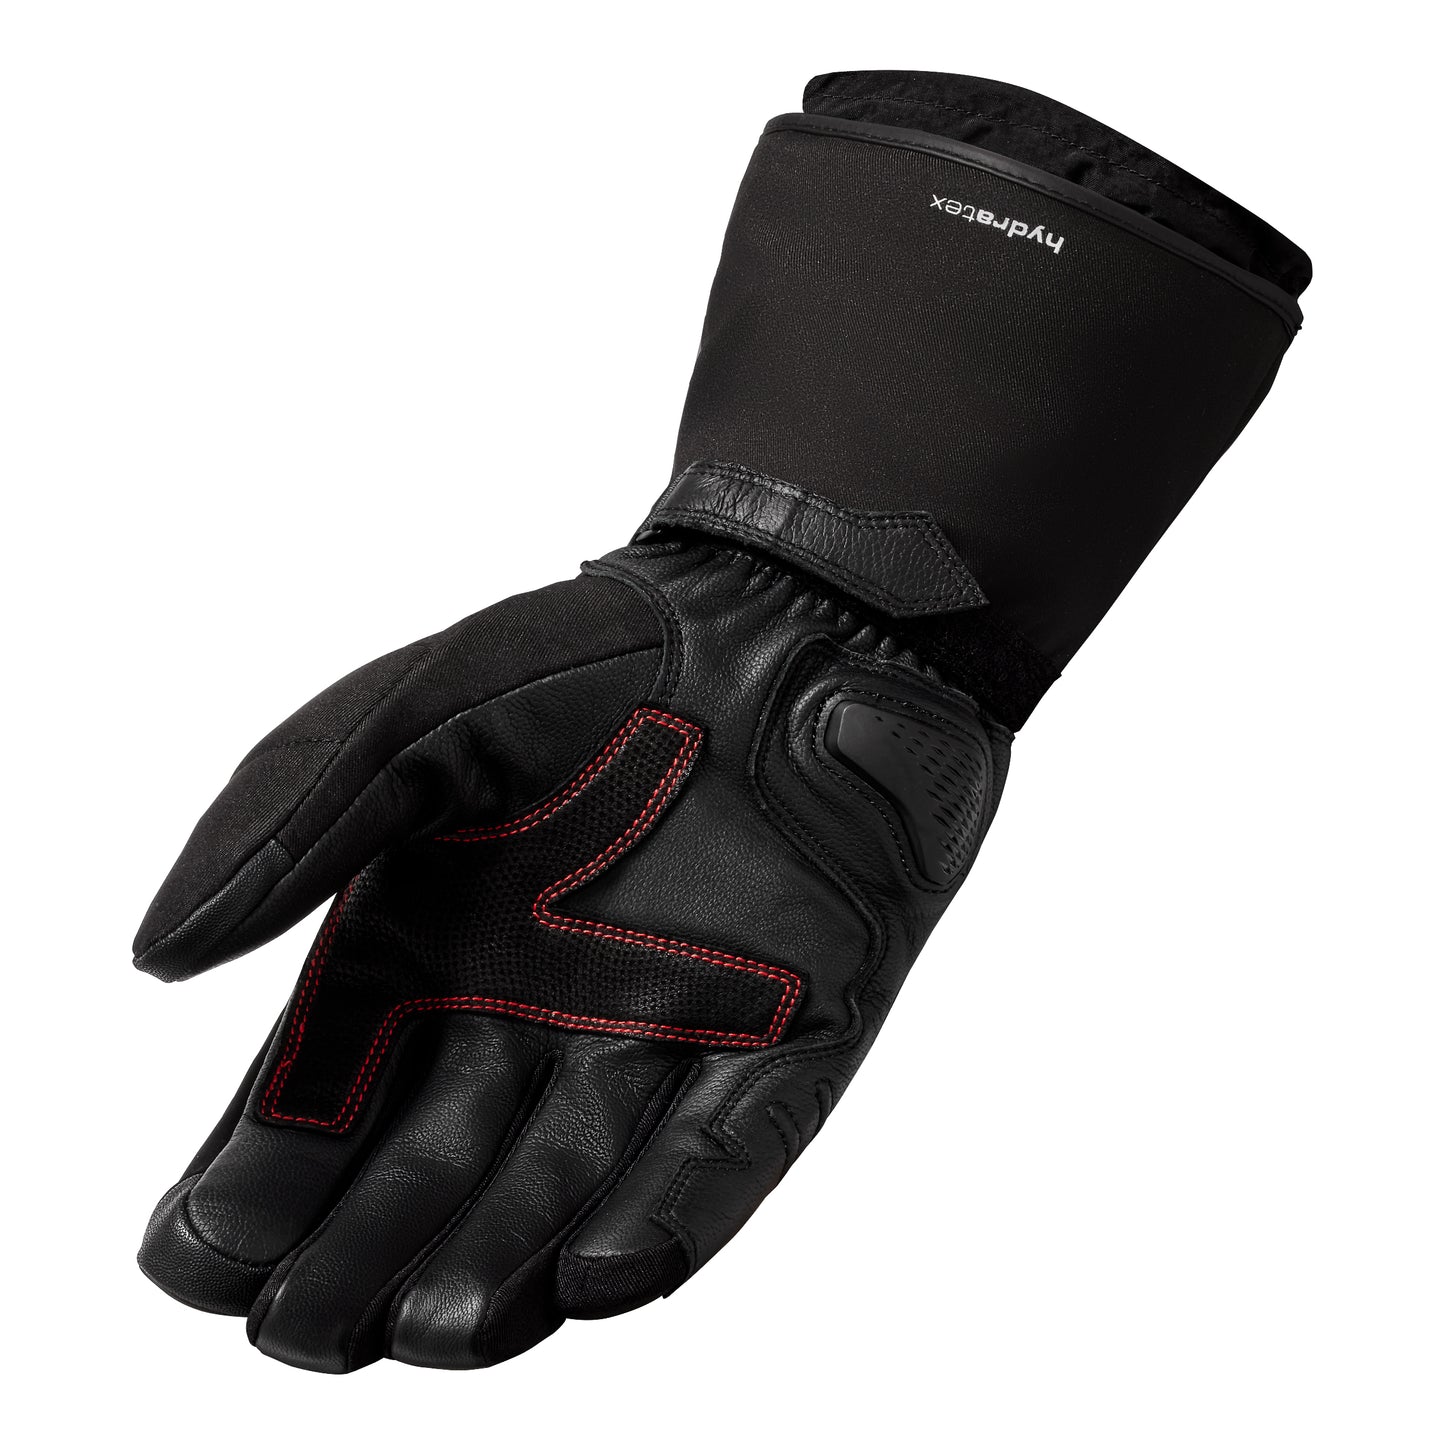 REV'IT! Liberty H2O Heated Gloves